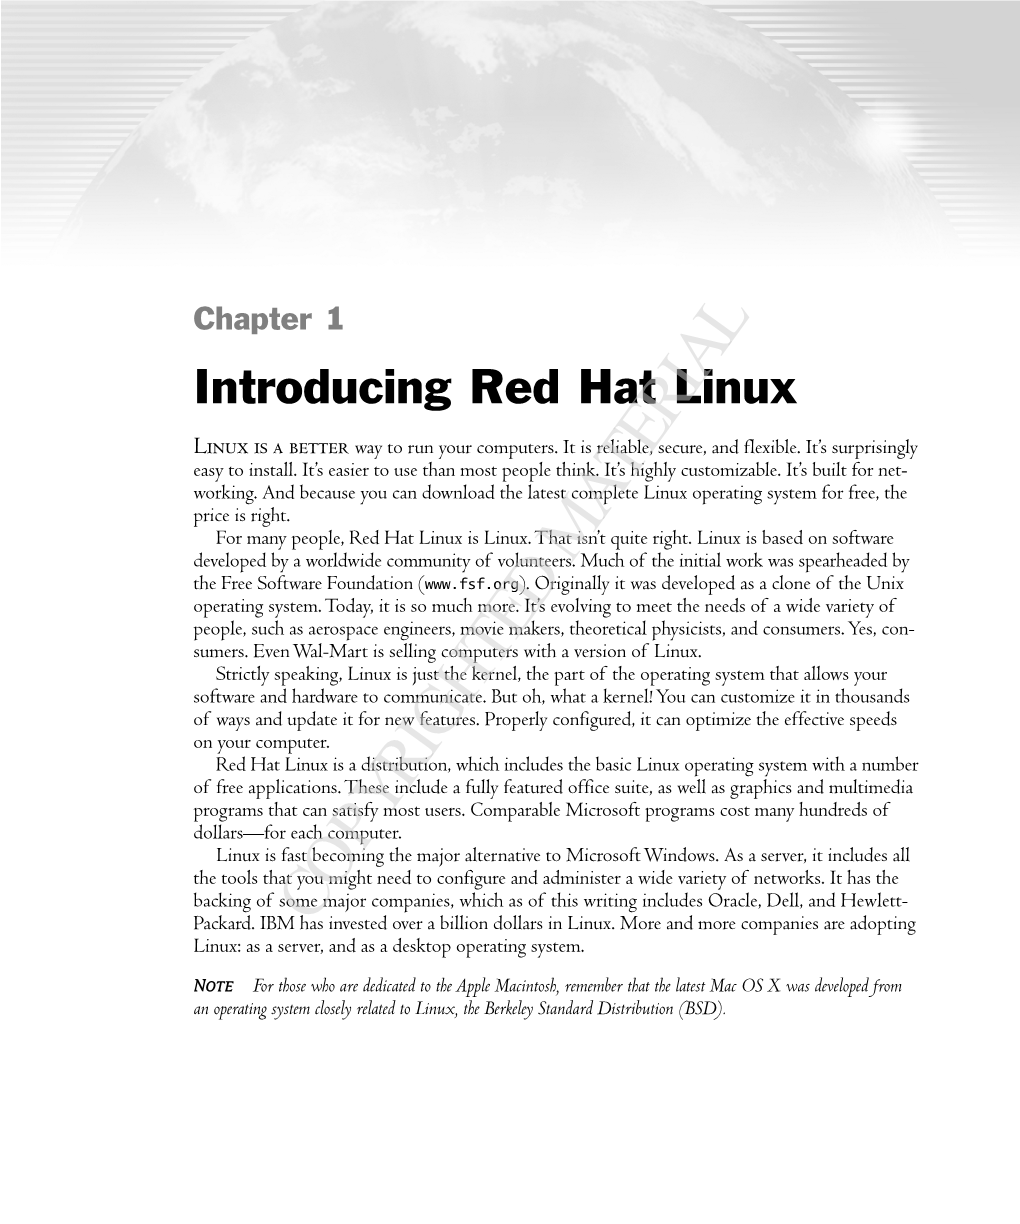 Introducing Red Hat Linux 9 ◆ a Short History of Unix and Linux ◆ Exploring the Kernel ◆ Why Choose Linux? ◆ the Role of a Linux Computer